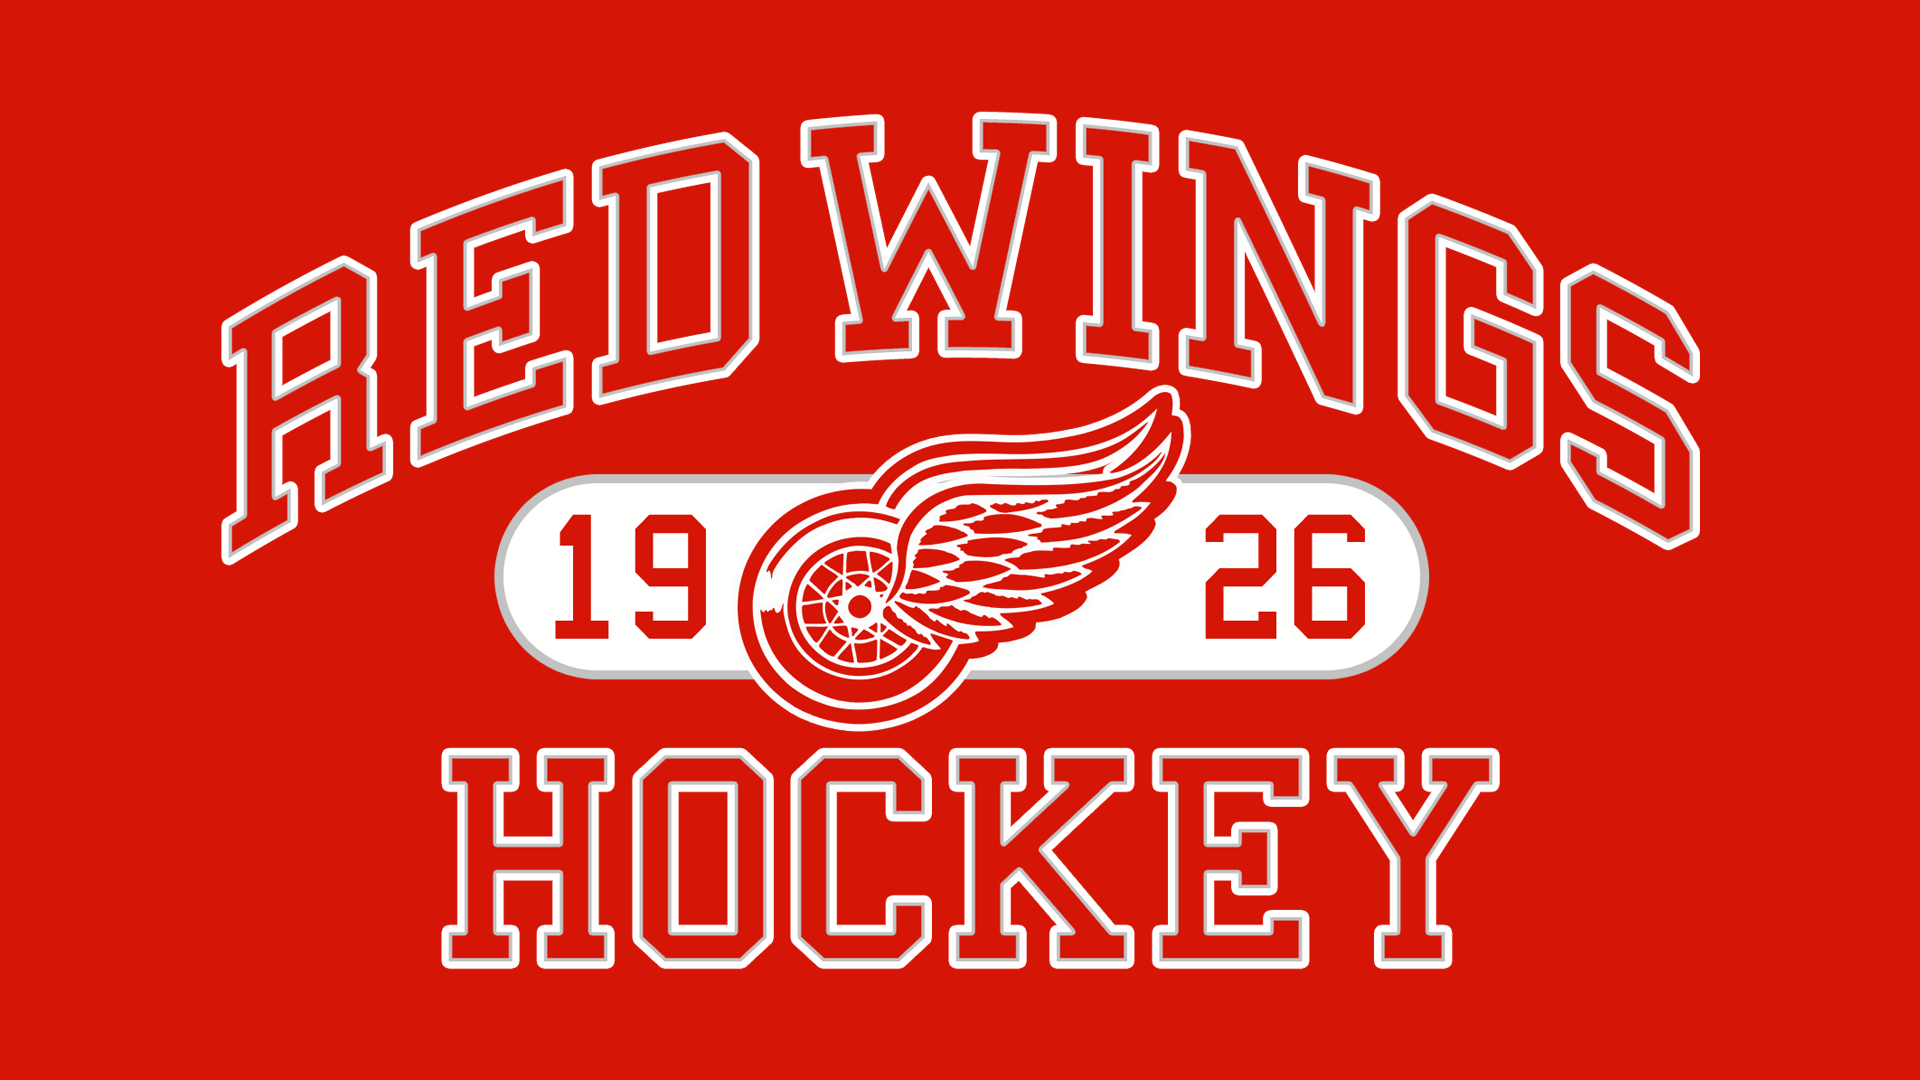 Detroit Red Wings Wallpaper Image Photos Pictures Background